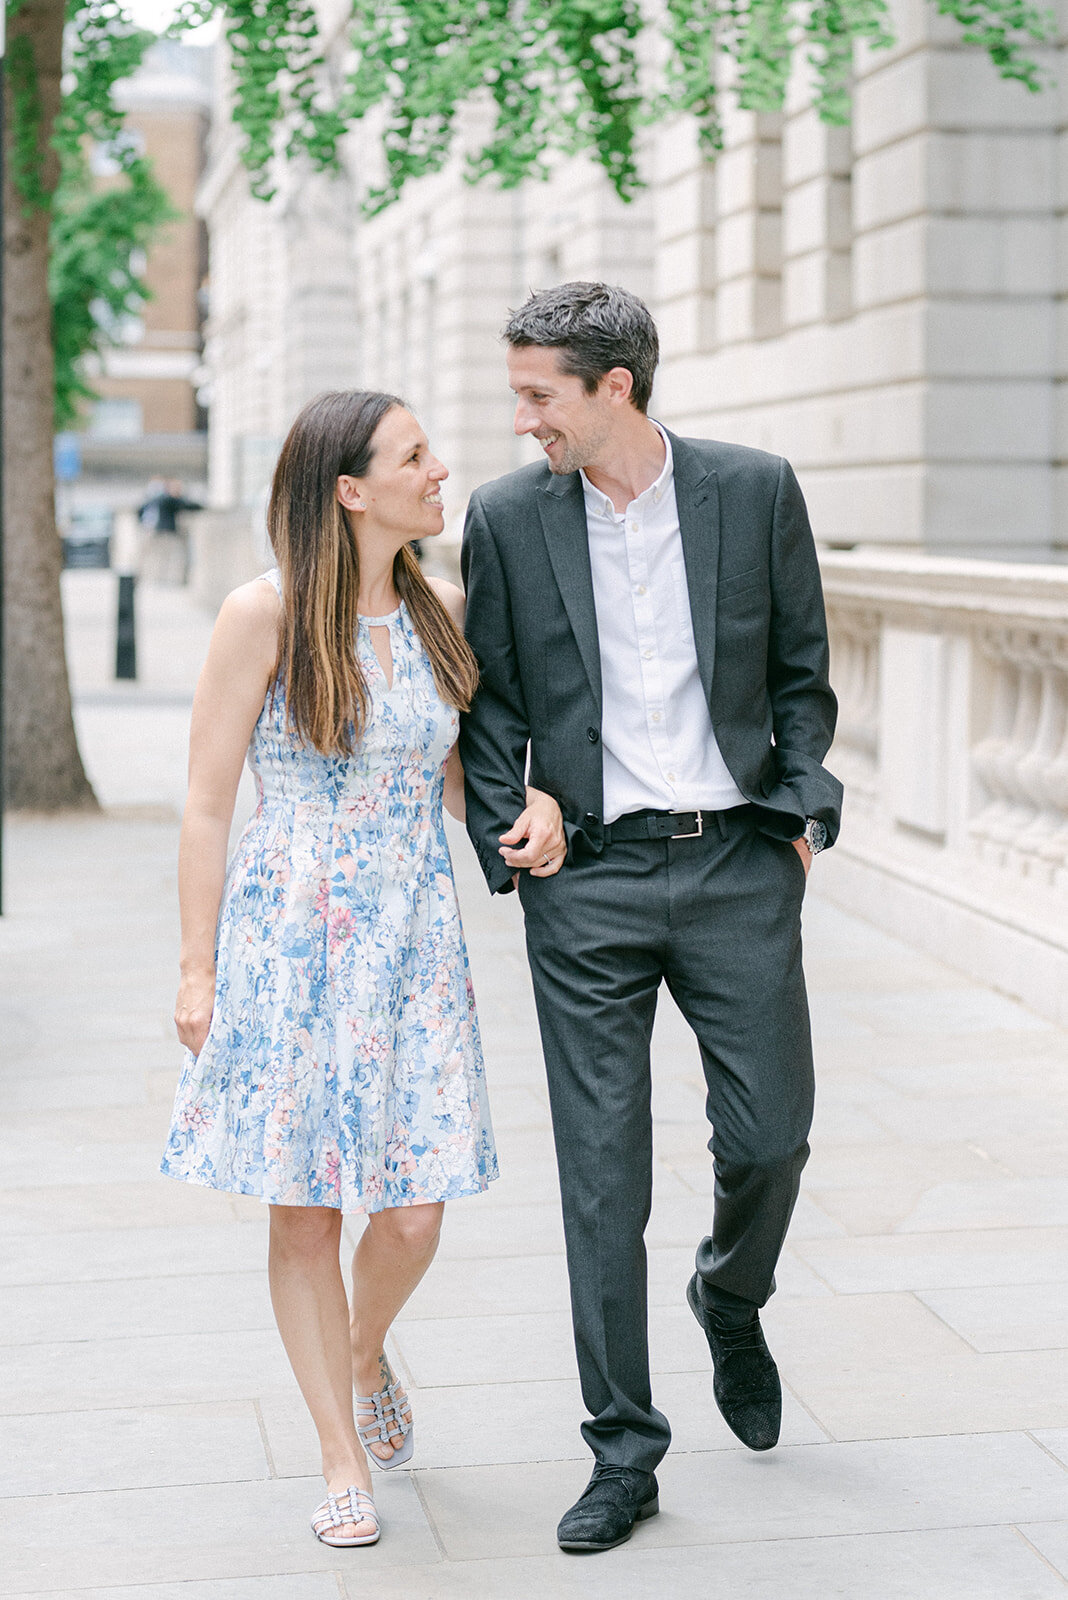 Couple strolling through London for an engagement photoshoot, The man is in a black suit and the lady is wearing a blue flowery dress and they are looking at each other smiling